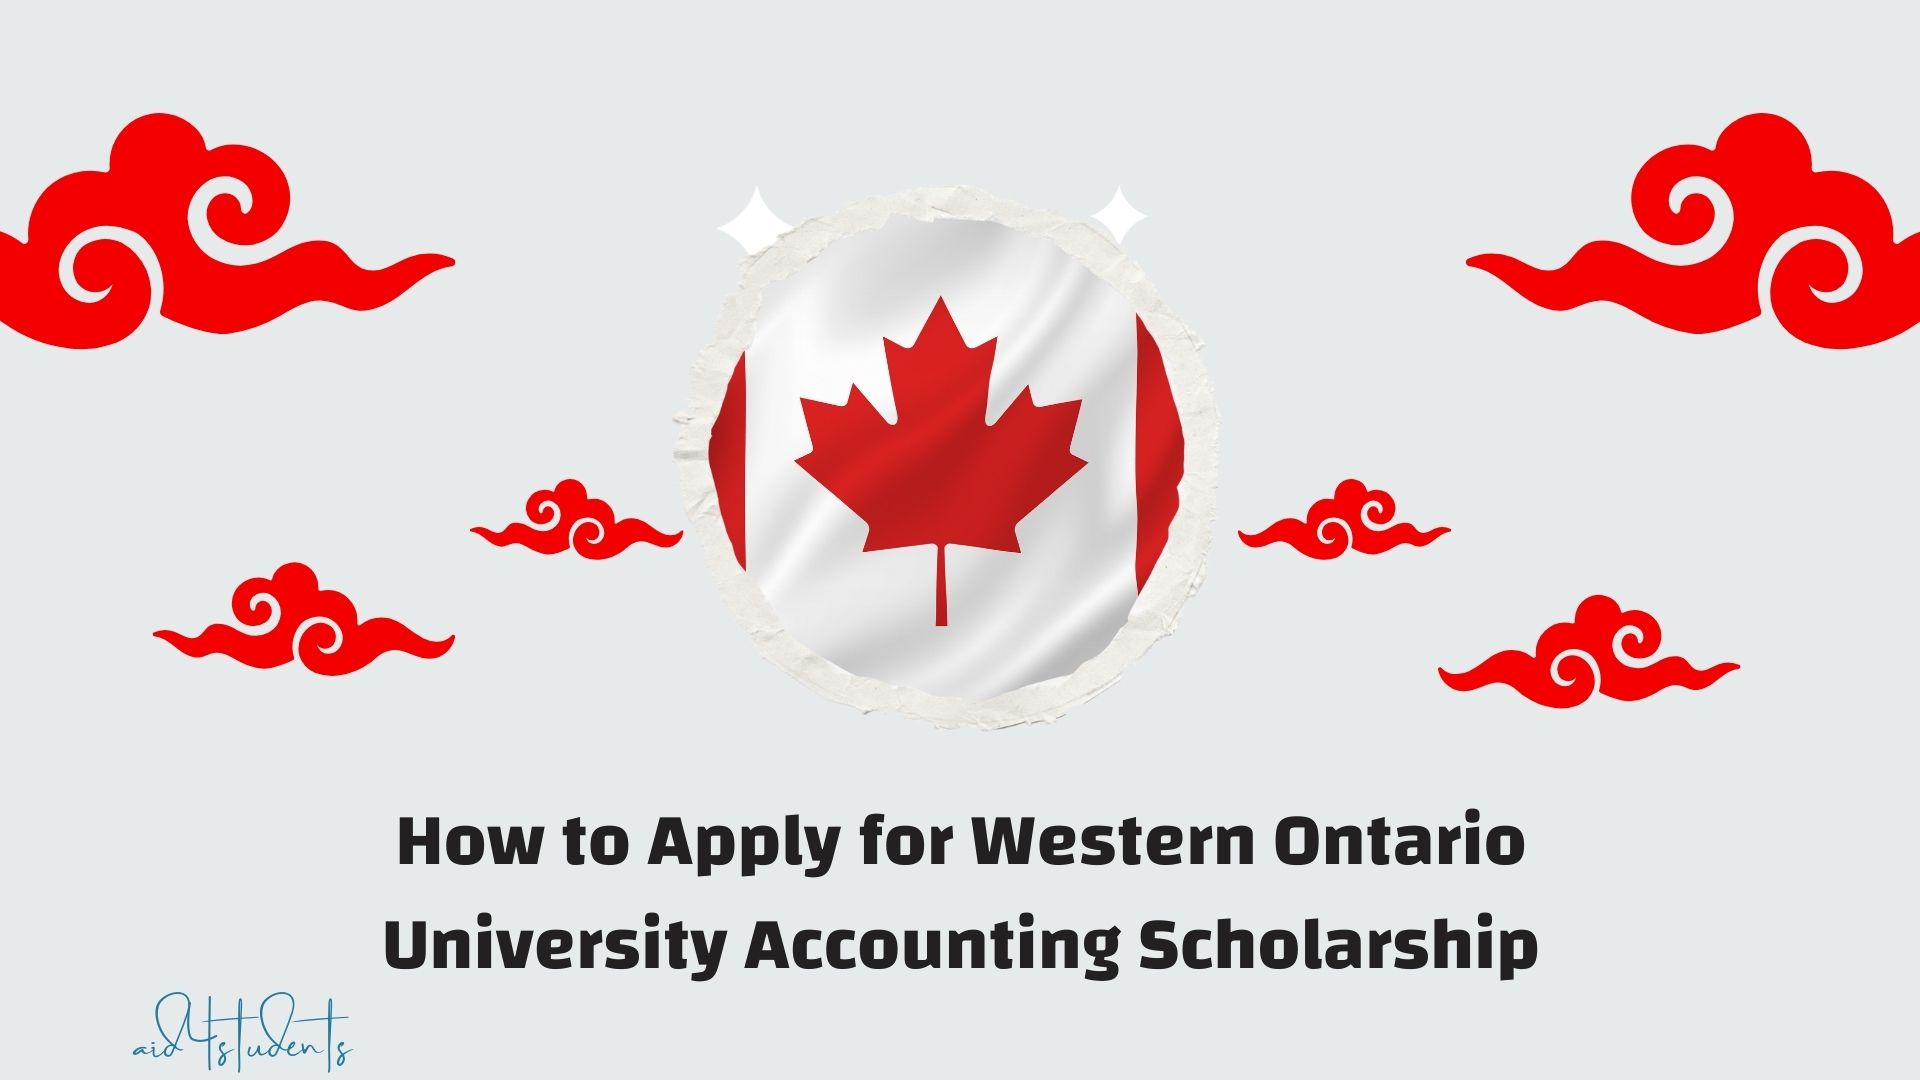 How to Apply for Western Ontario University Accounting Scholarship